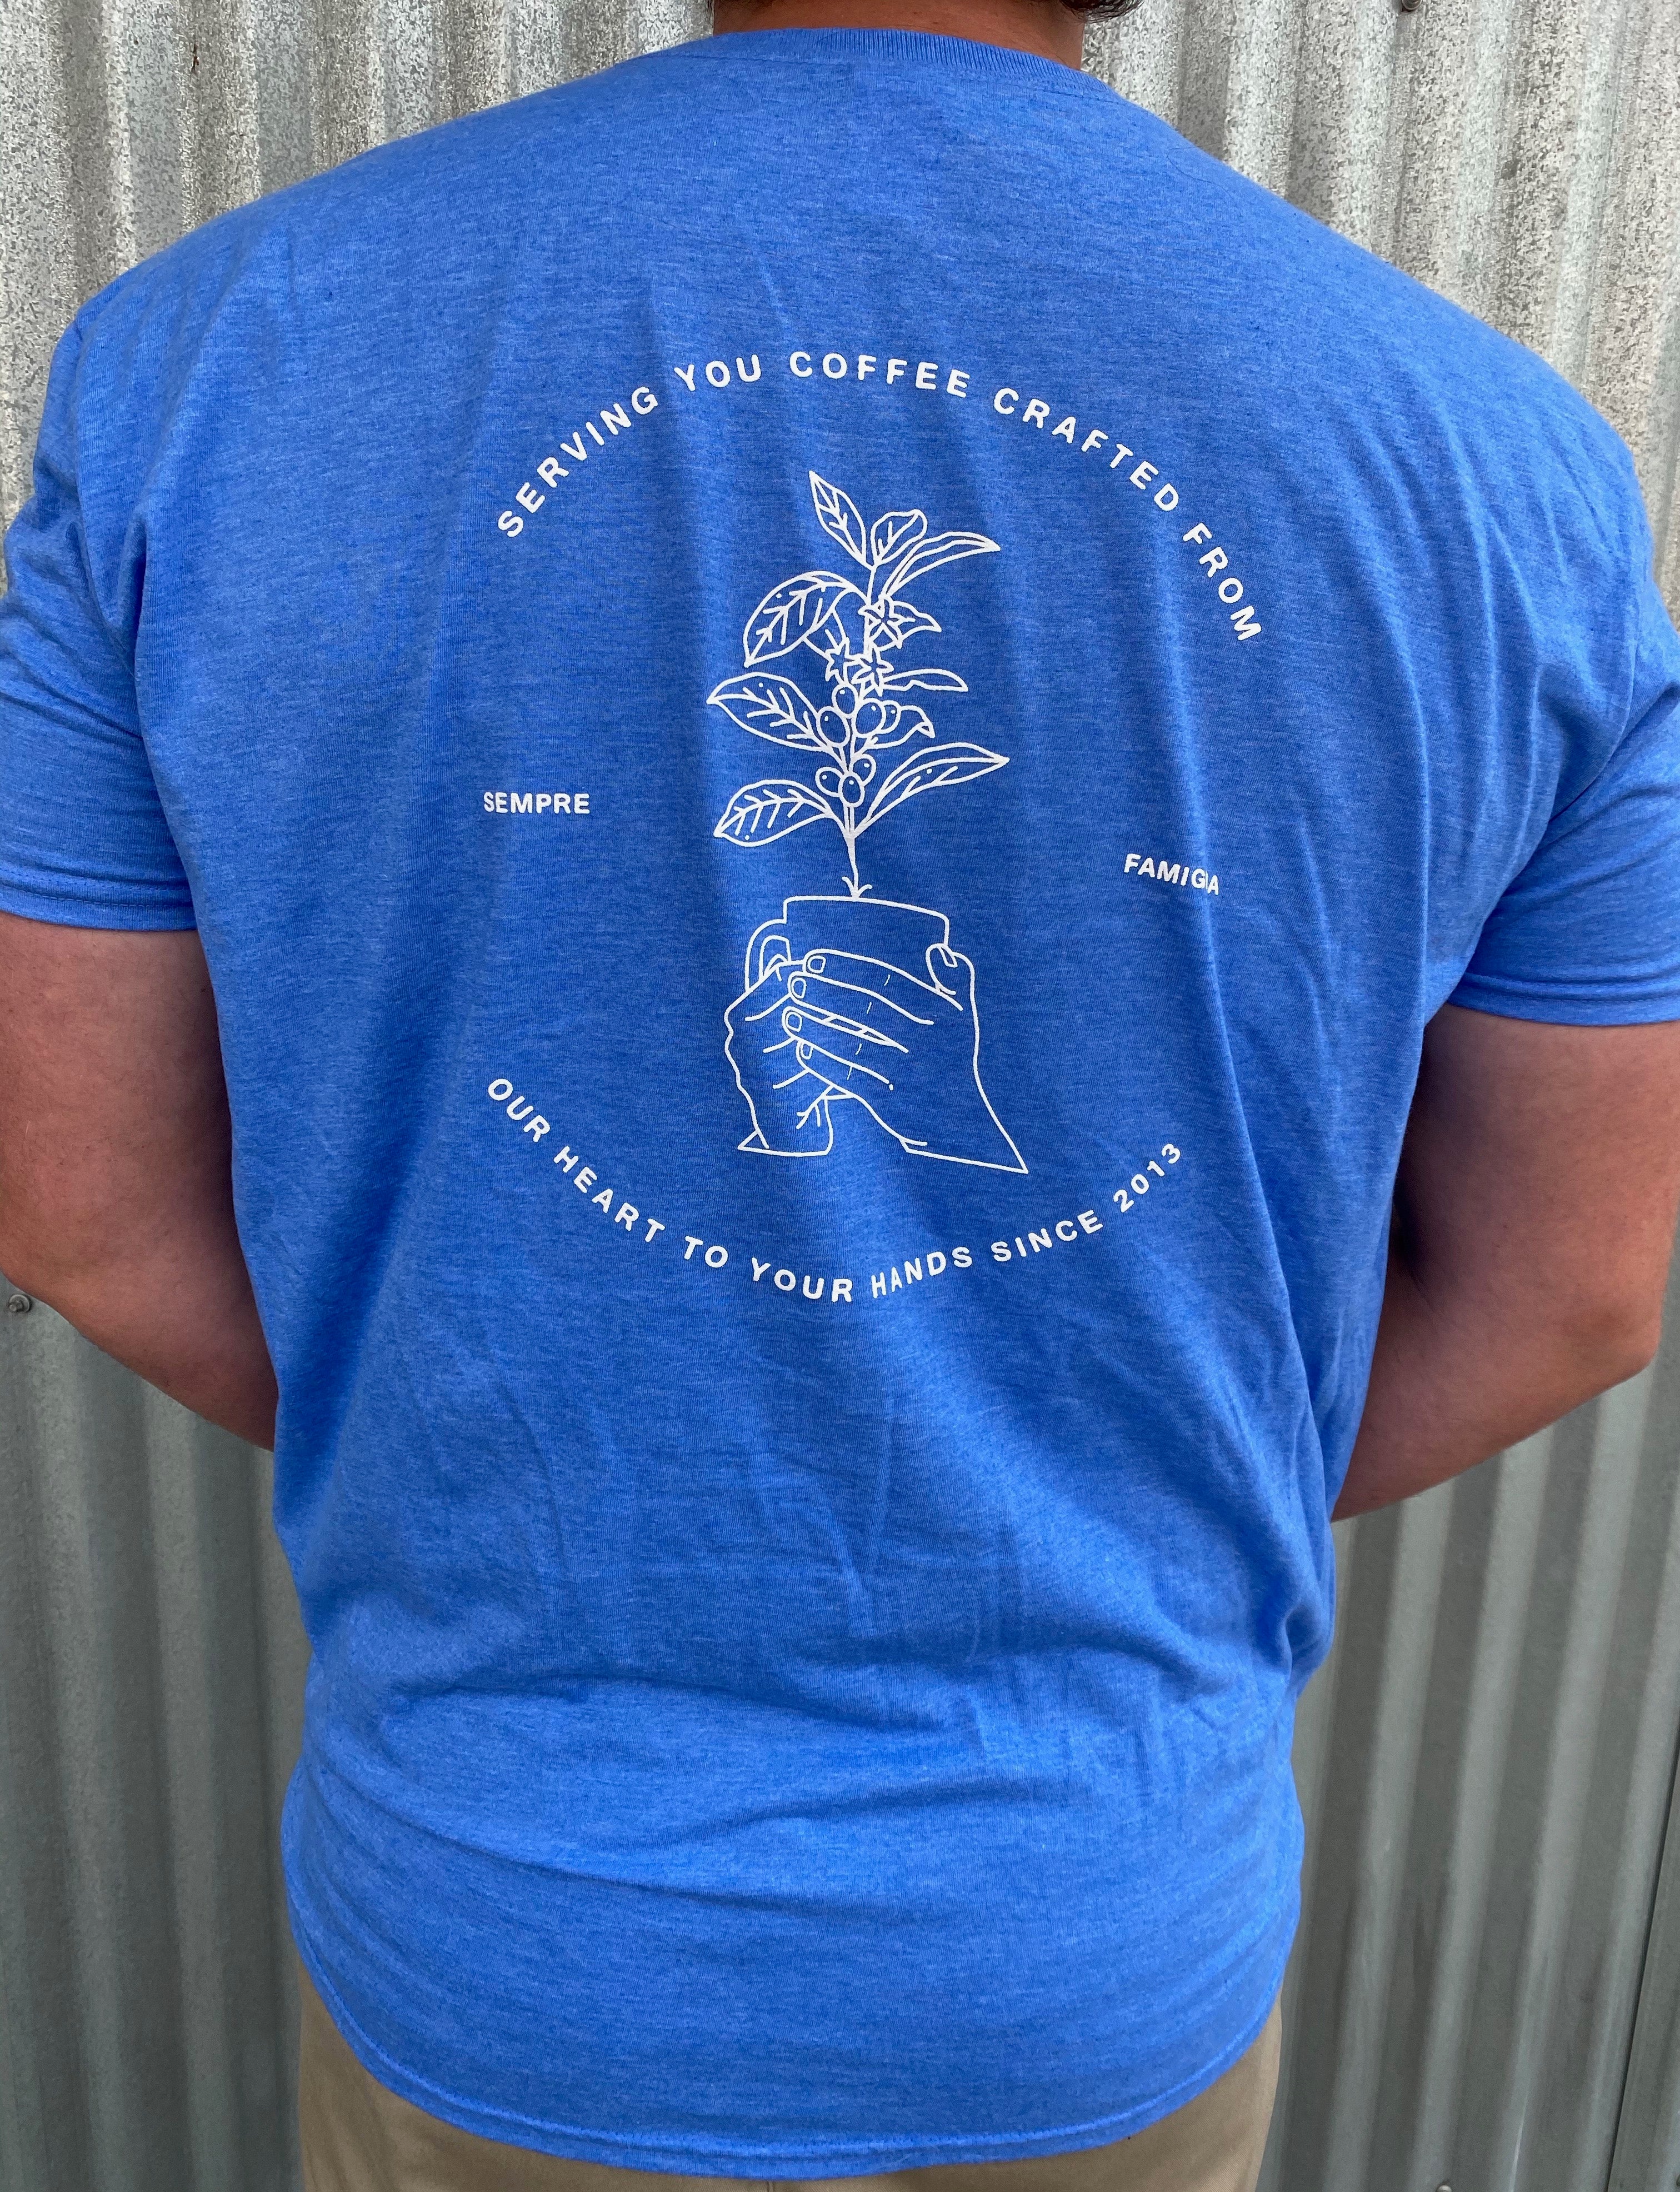 Blue Zolo T-Shirt and Bag of Coffee